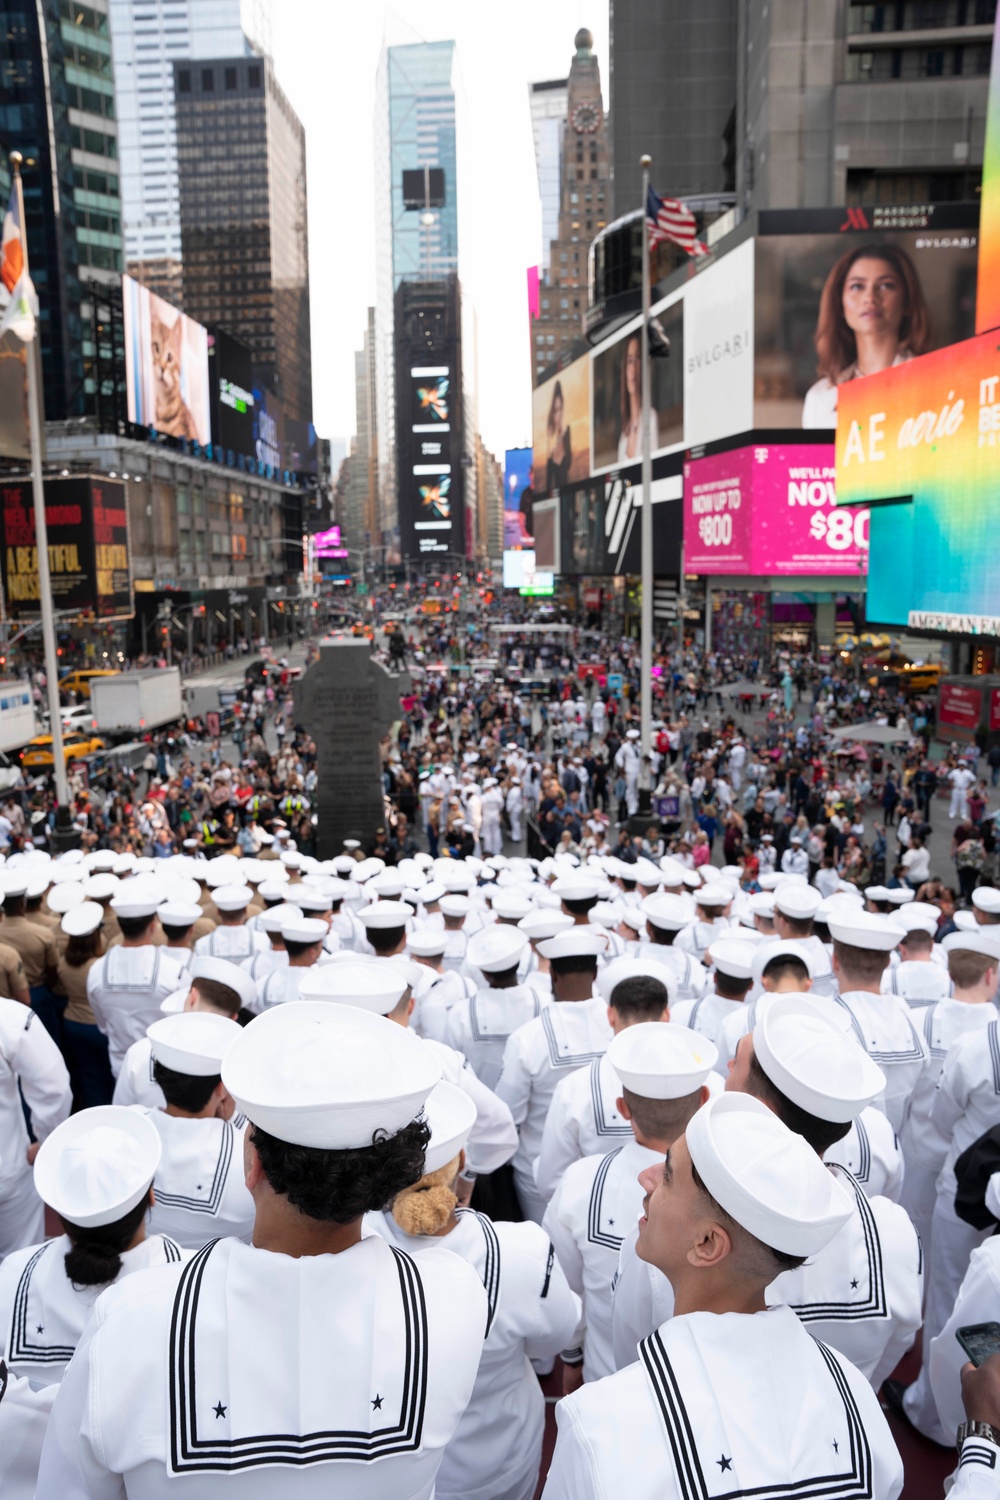 DVIDS Images Fleet Week New York 2023 Times Square [Image 3 of 4]